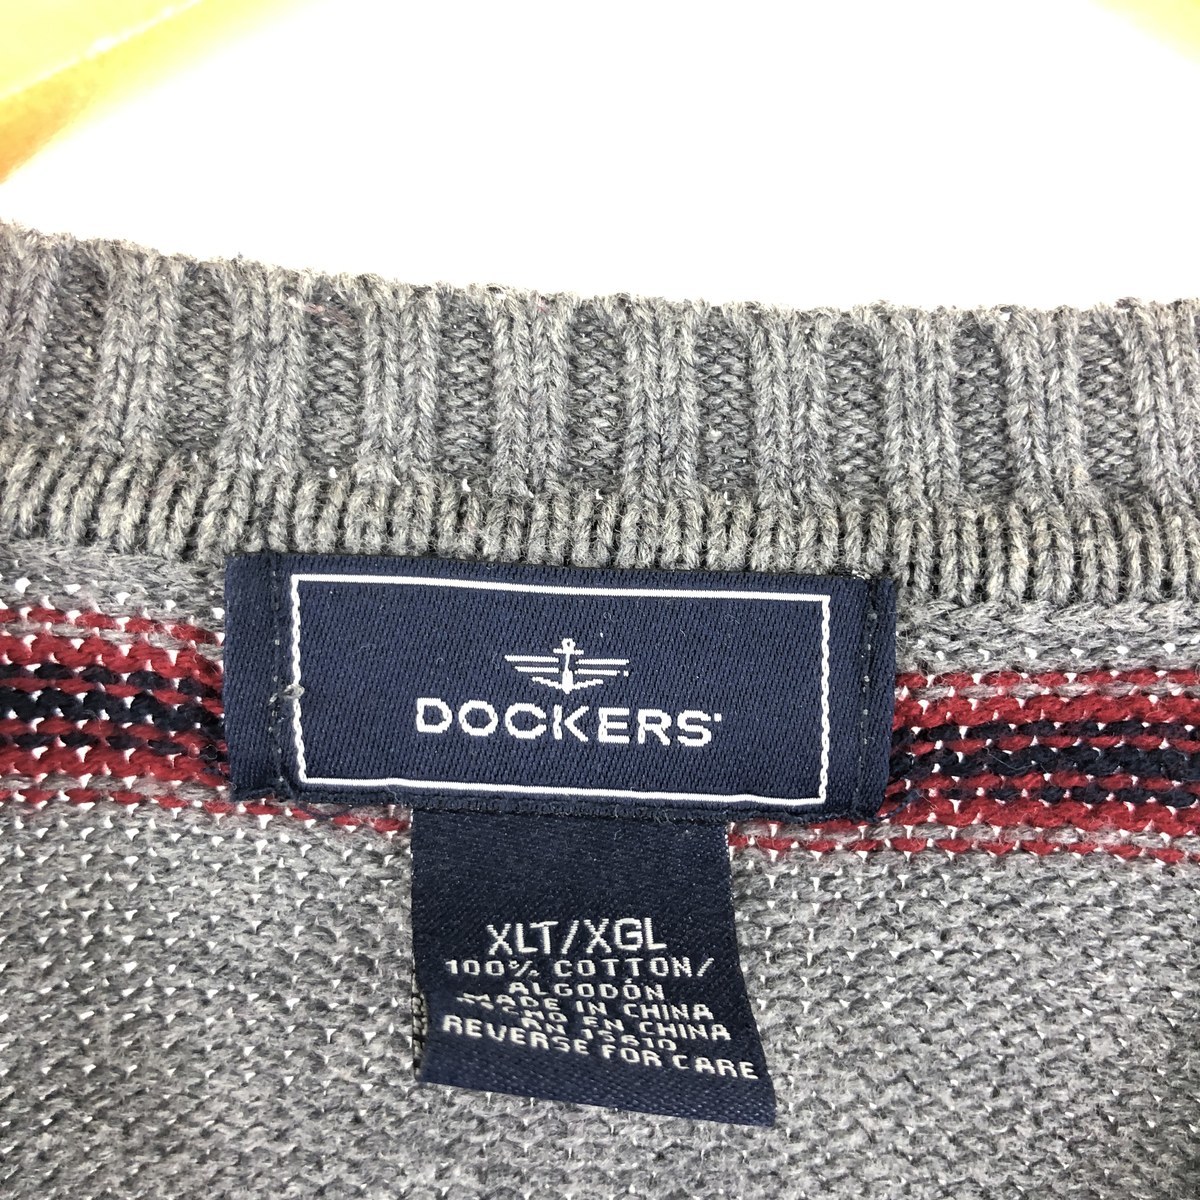  old clothes Docker's DOCKERS border pattern knitted sweater men's XL /eaa361769 [SS2403]